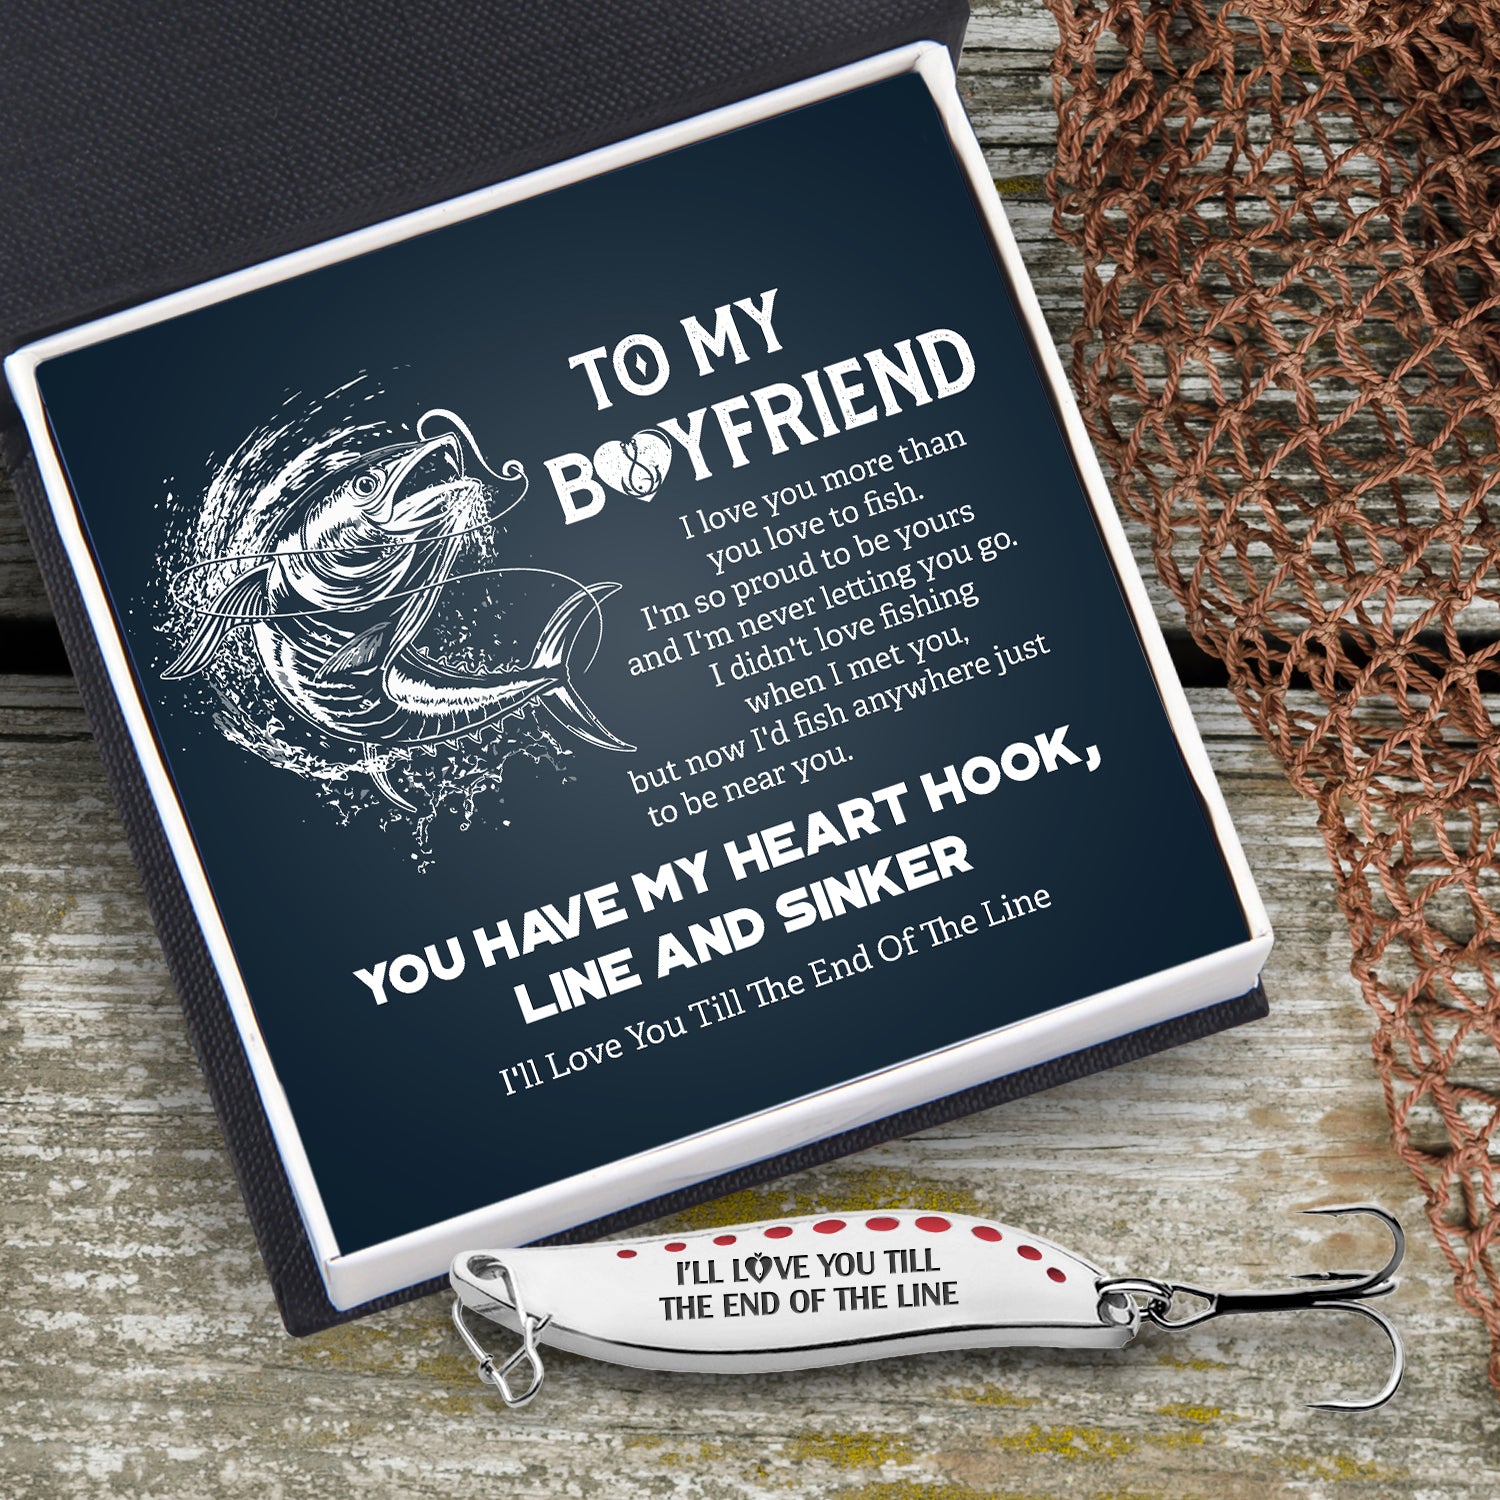 Fishing Lure - To My Wife - You Are The Love Of My Life - Gfb15002   Romantic christmas gifts, Boyfriend gifts, Gifts for your boyfriend